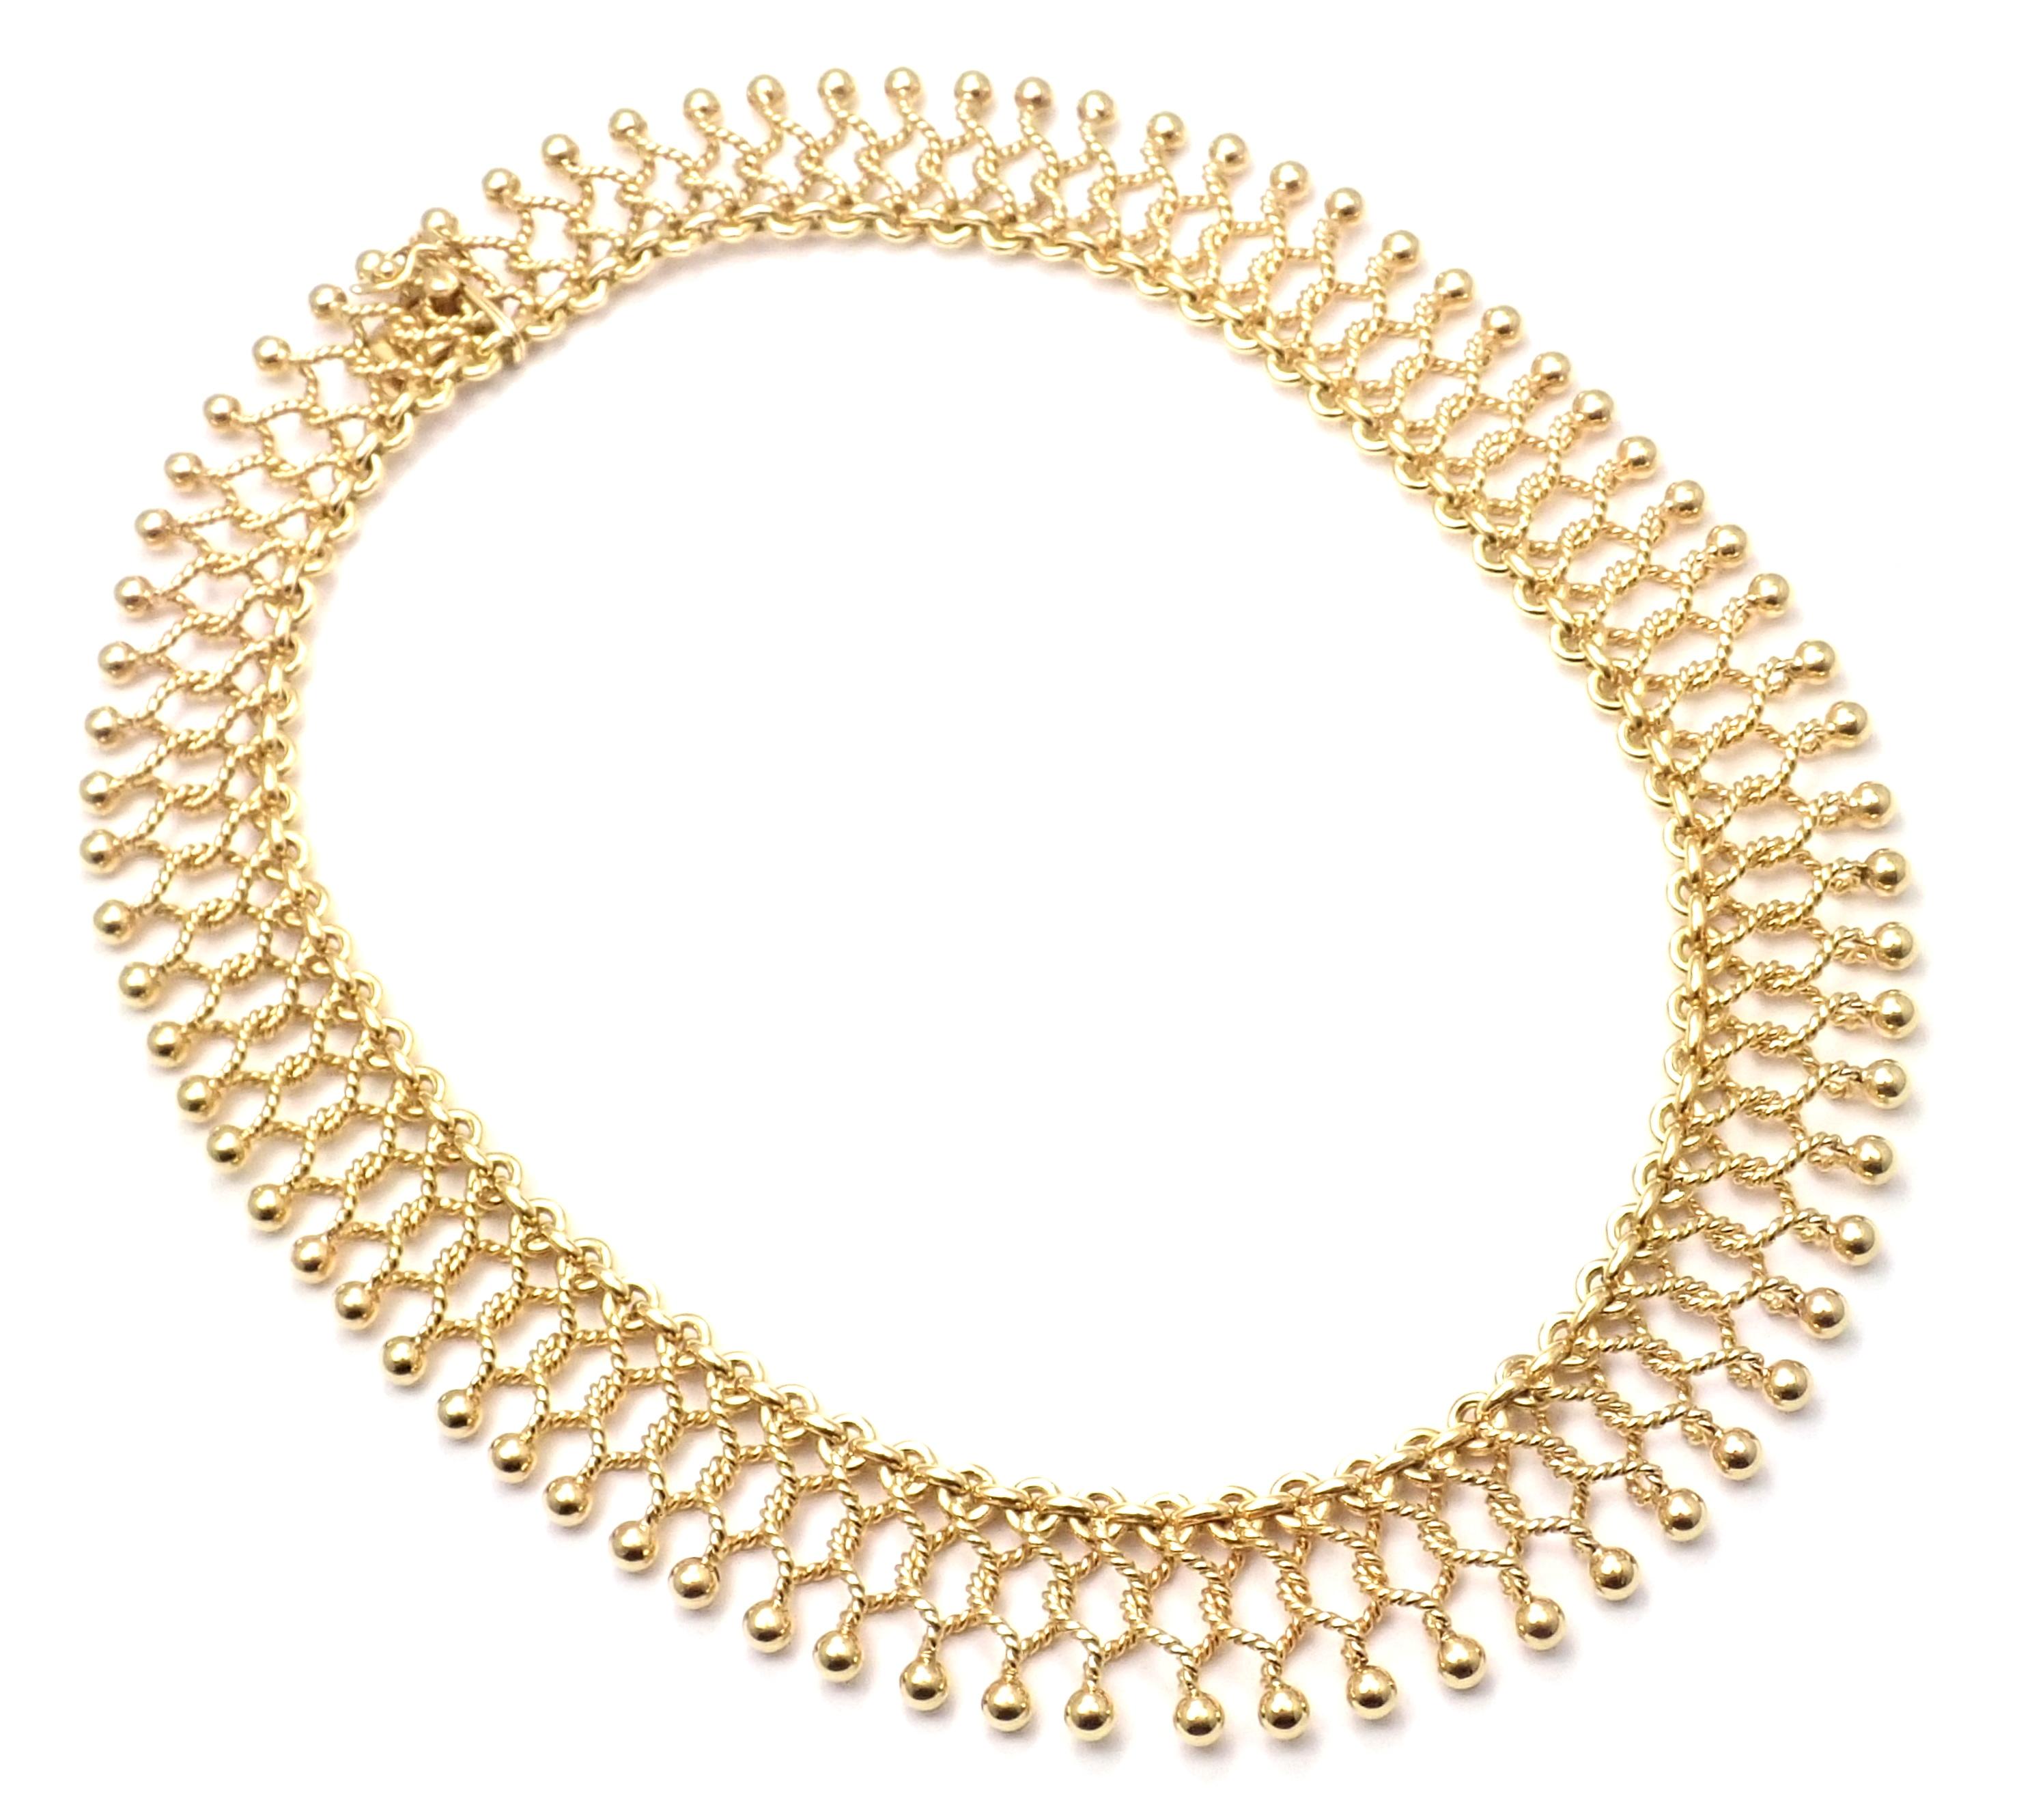 18k Yellow Gold Vintage Cleopatra Collar Necklace by Tiffany Co.
Details: 
Length: 15